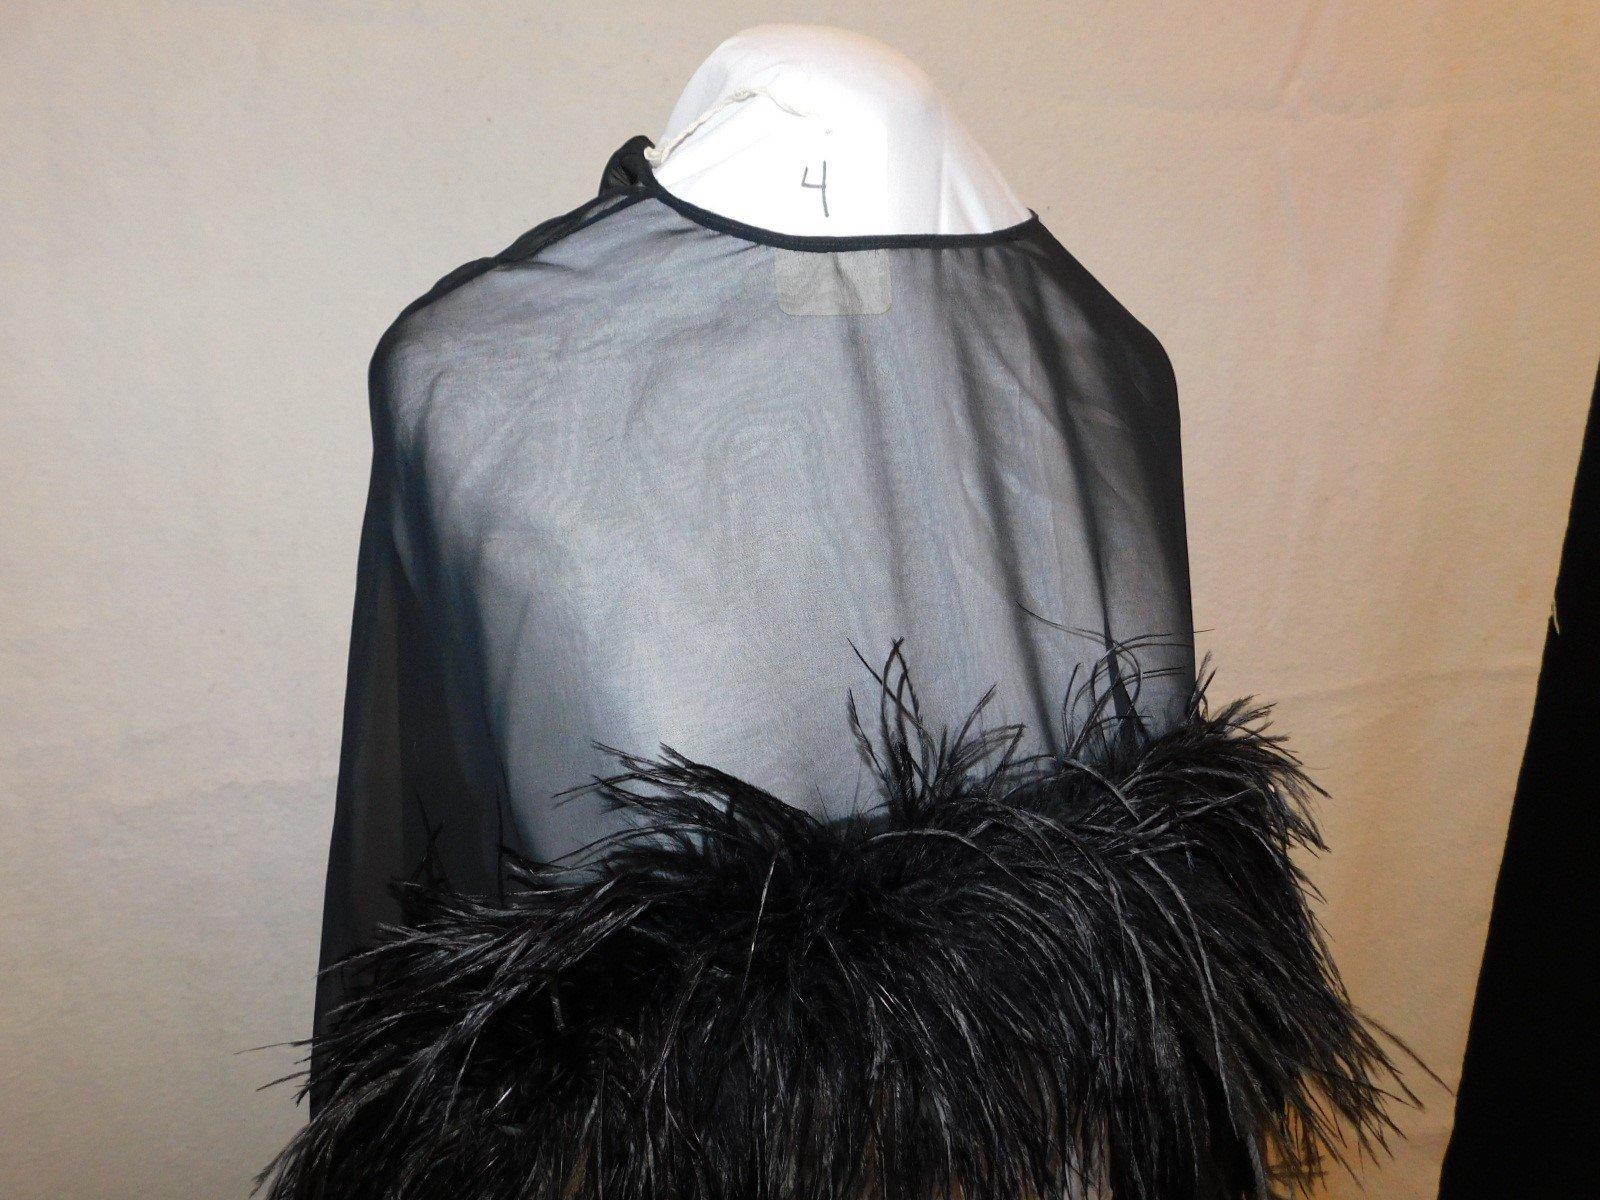 SHAWL:  BLACK FEATHERS COMBINED  WITH SHEER MATERIAL (SEE PHOTO), SHORT IN